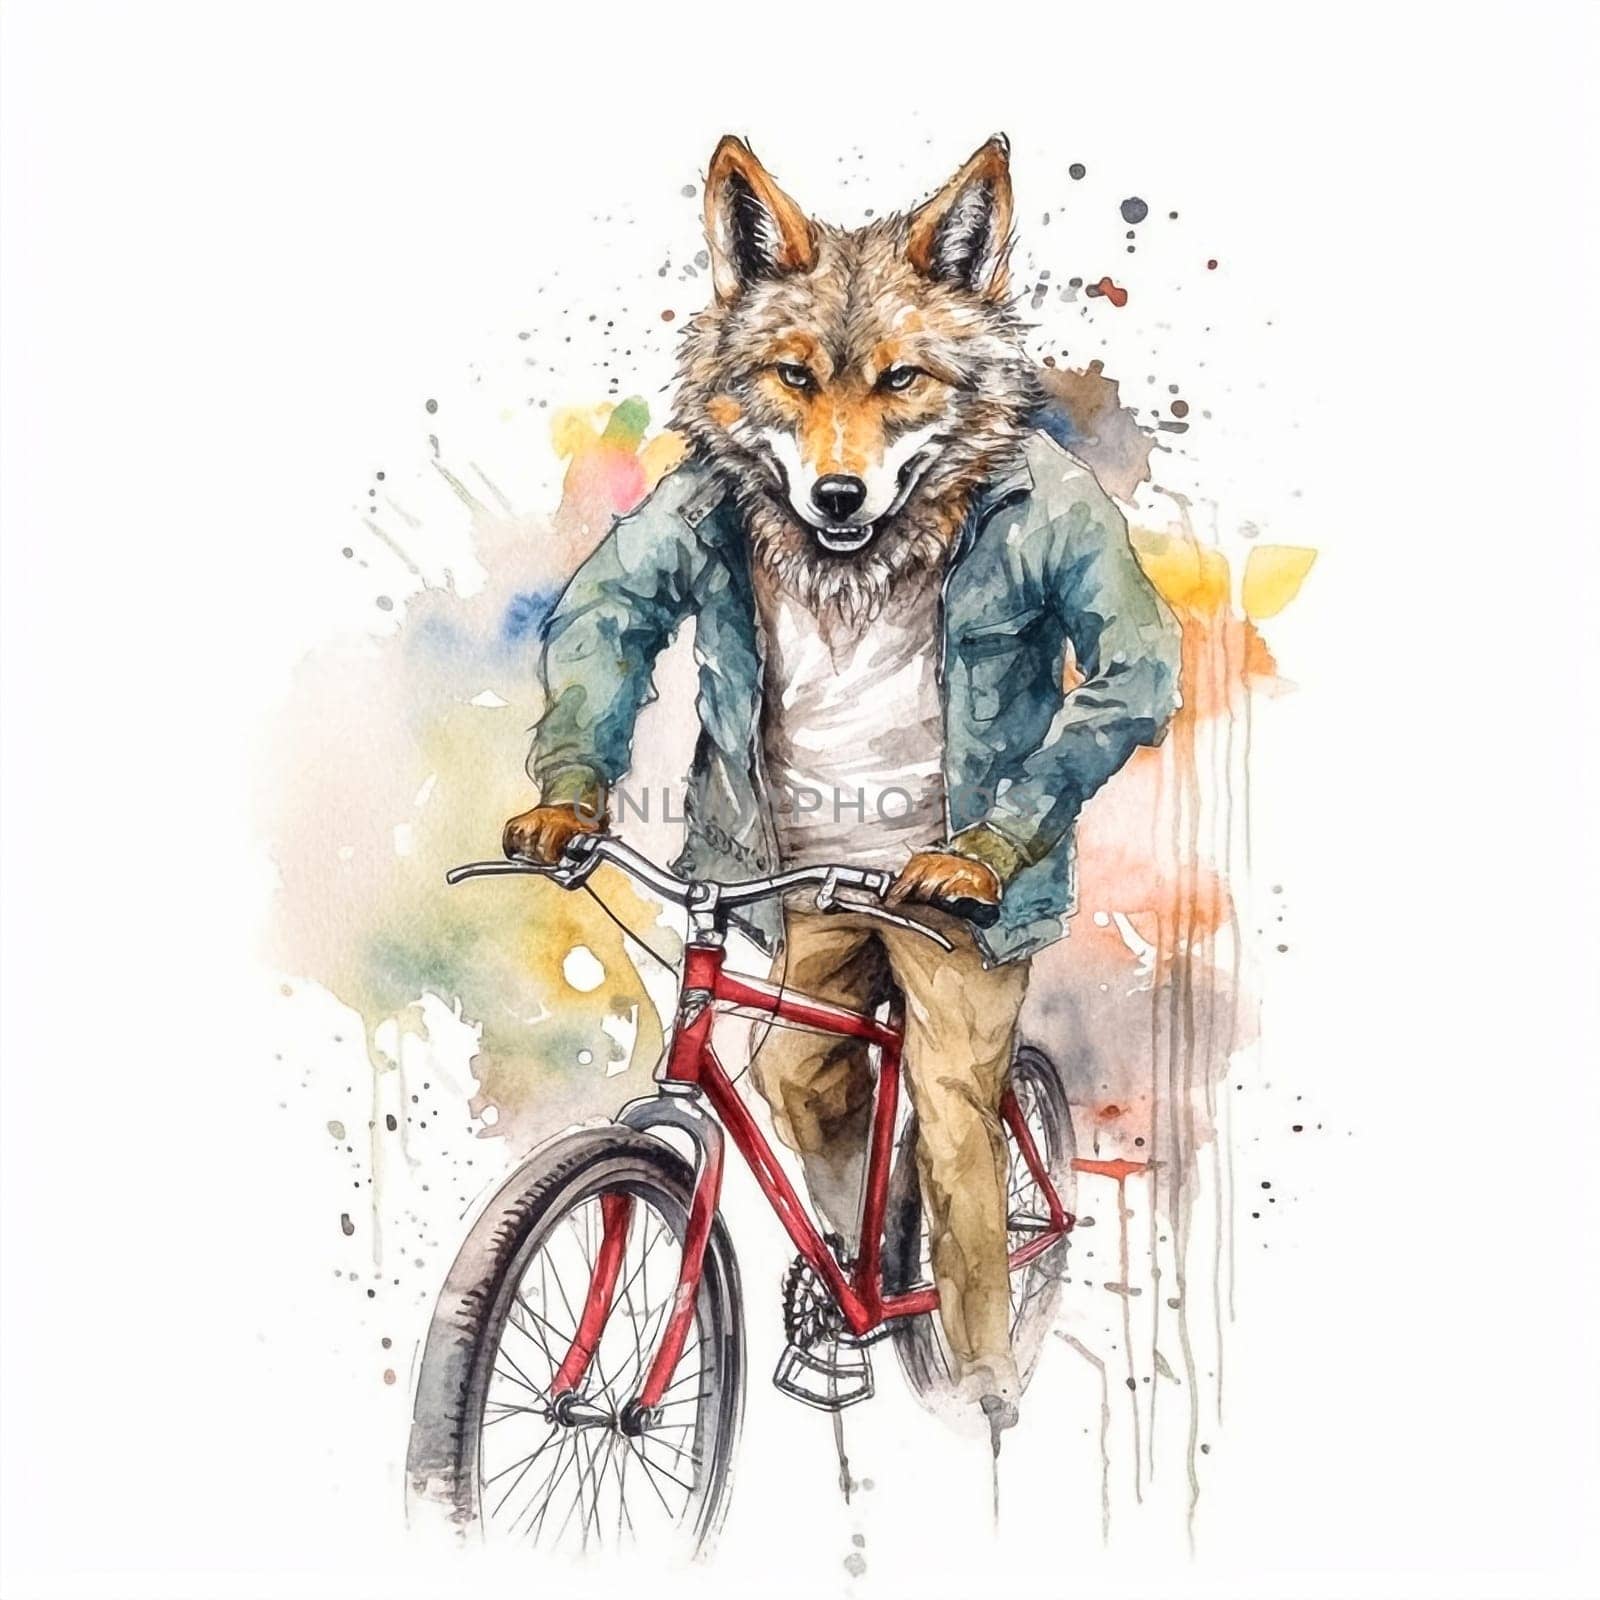 The watercolor adventure of Wolf on a Bike unfolds, a thrilling combination of nature and machine that captures the wild spirit of the open road in vibrant color.